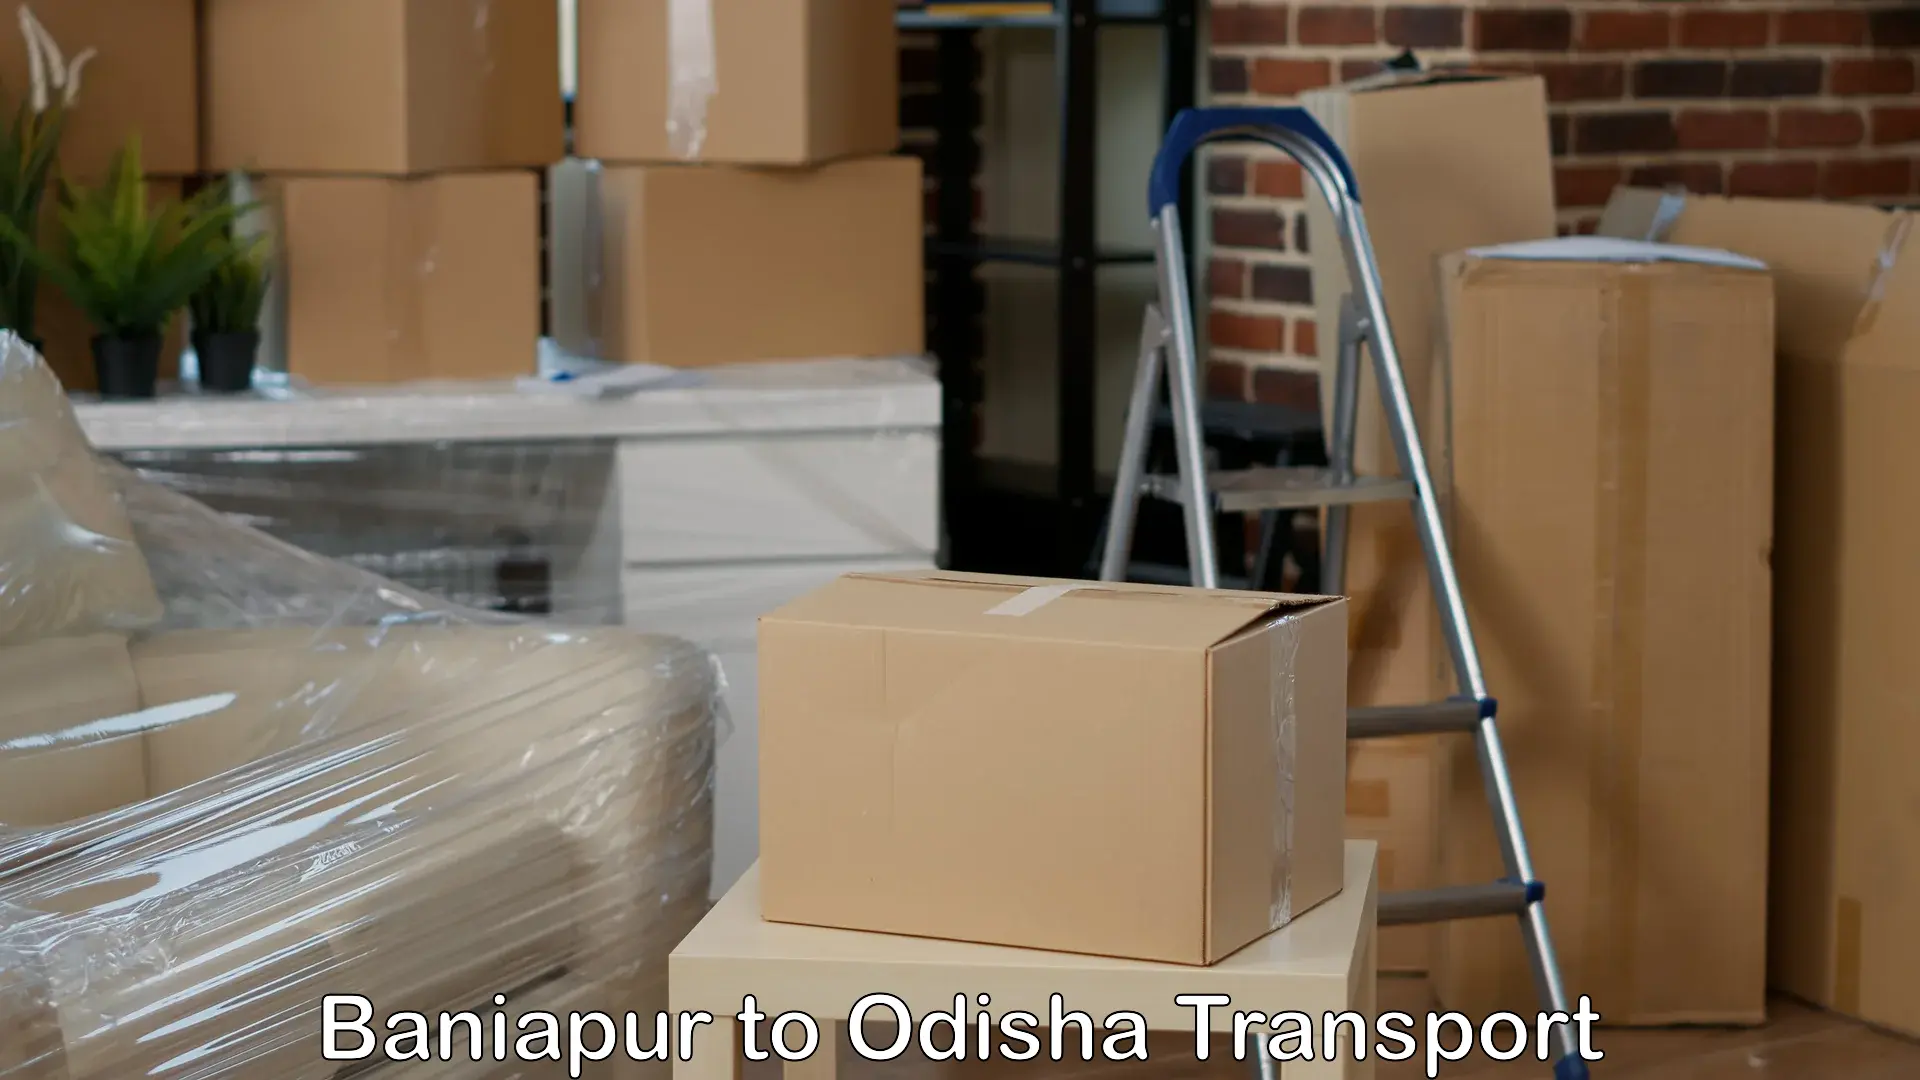 Daily parcel service transport in Baniapur to Asika